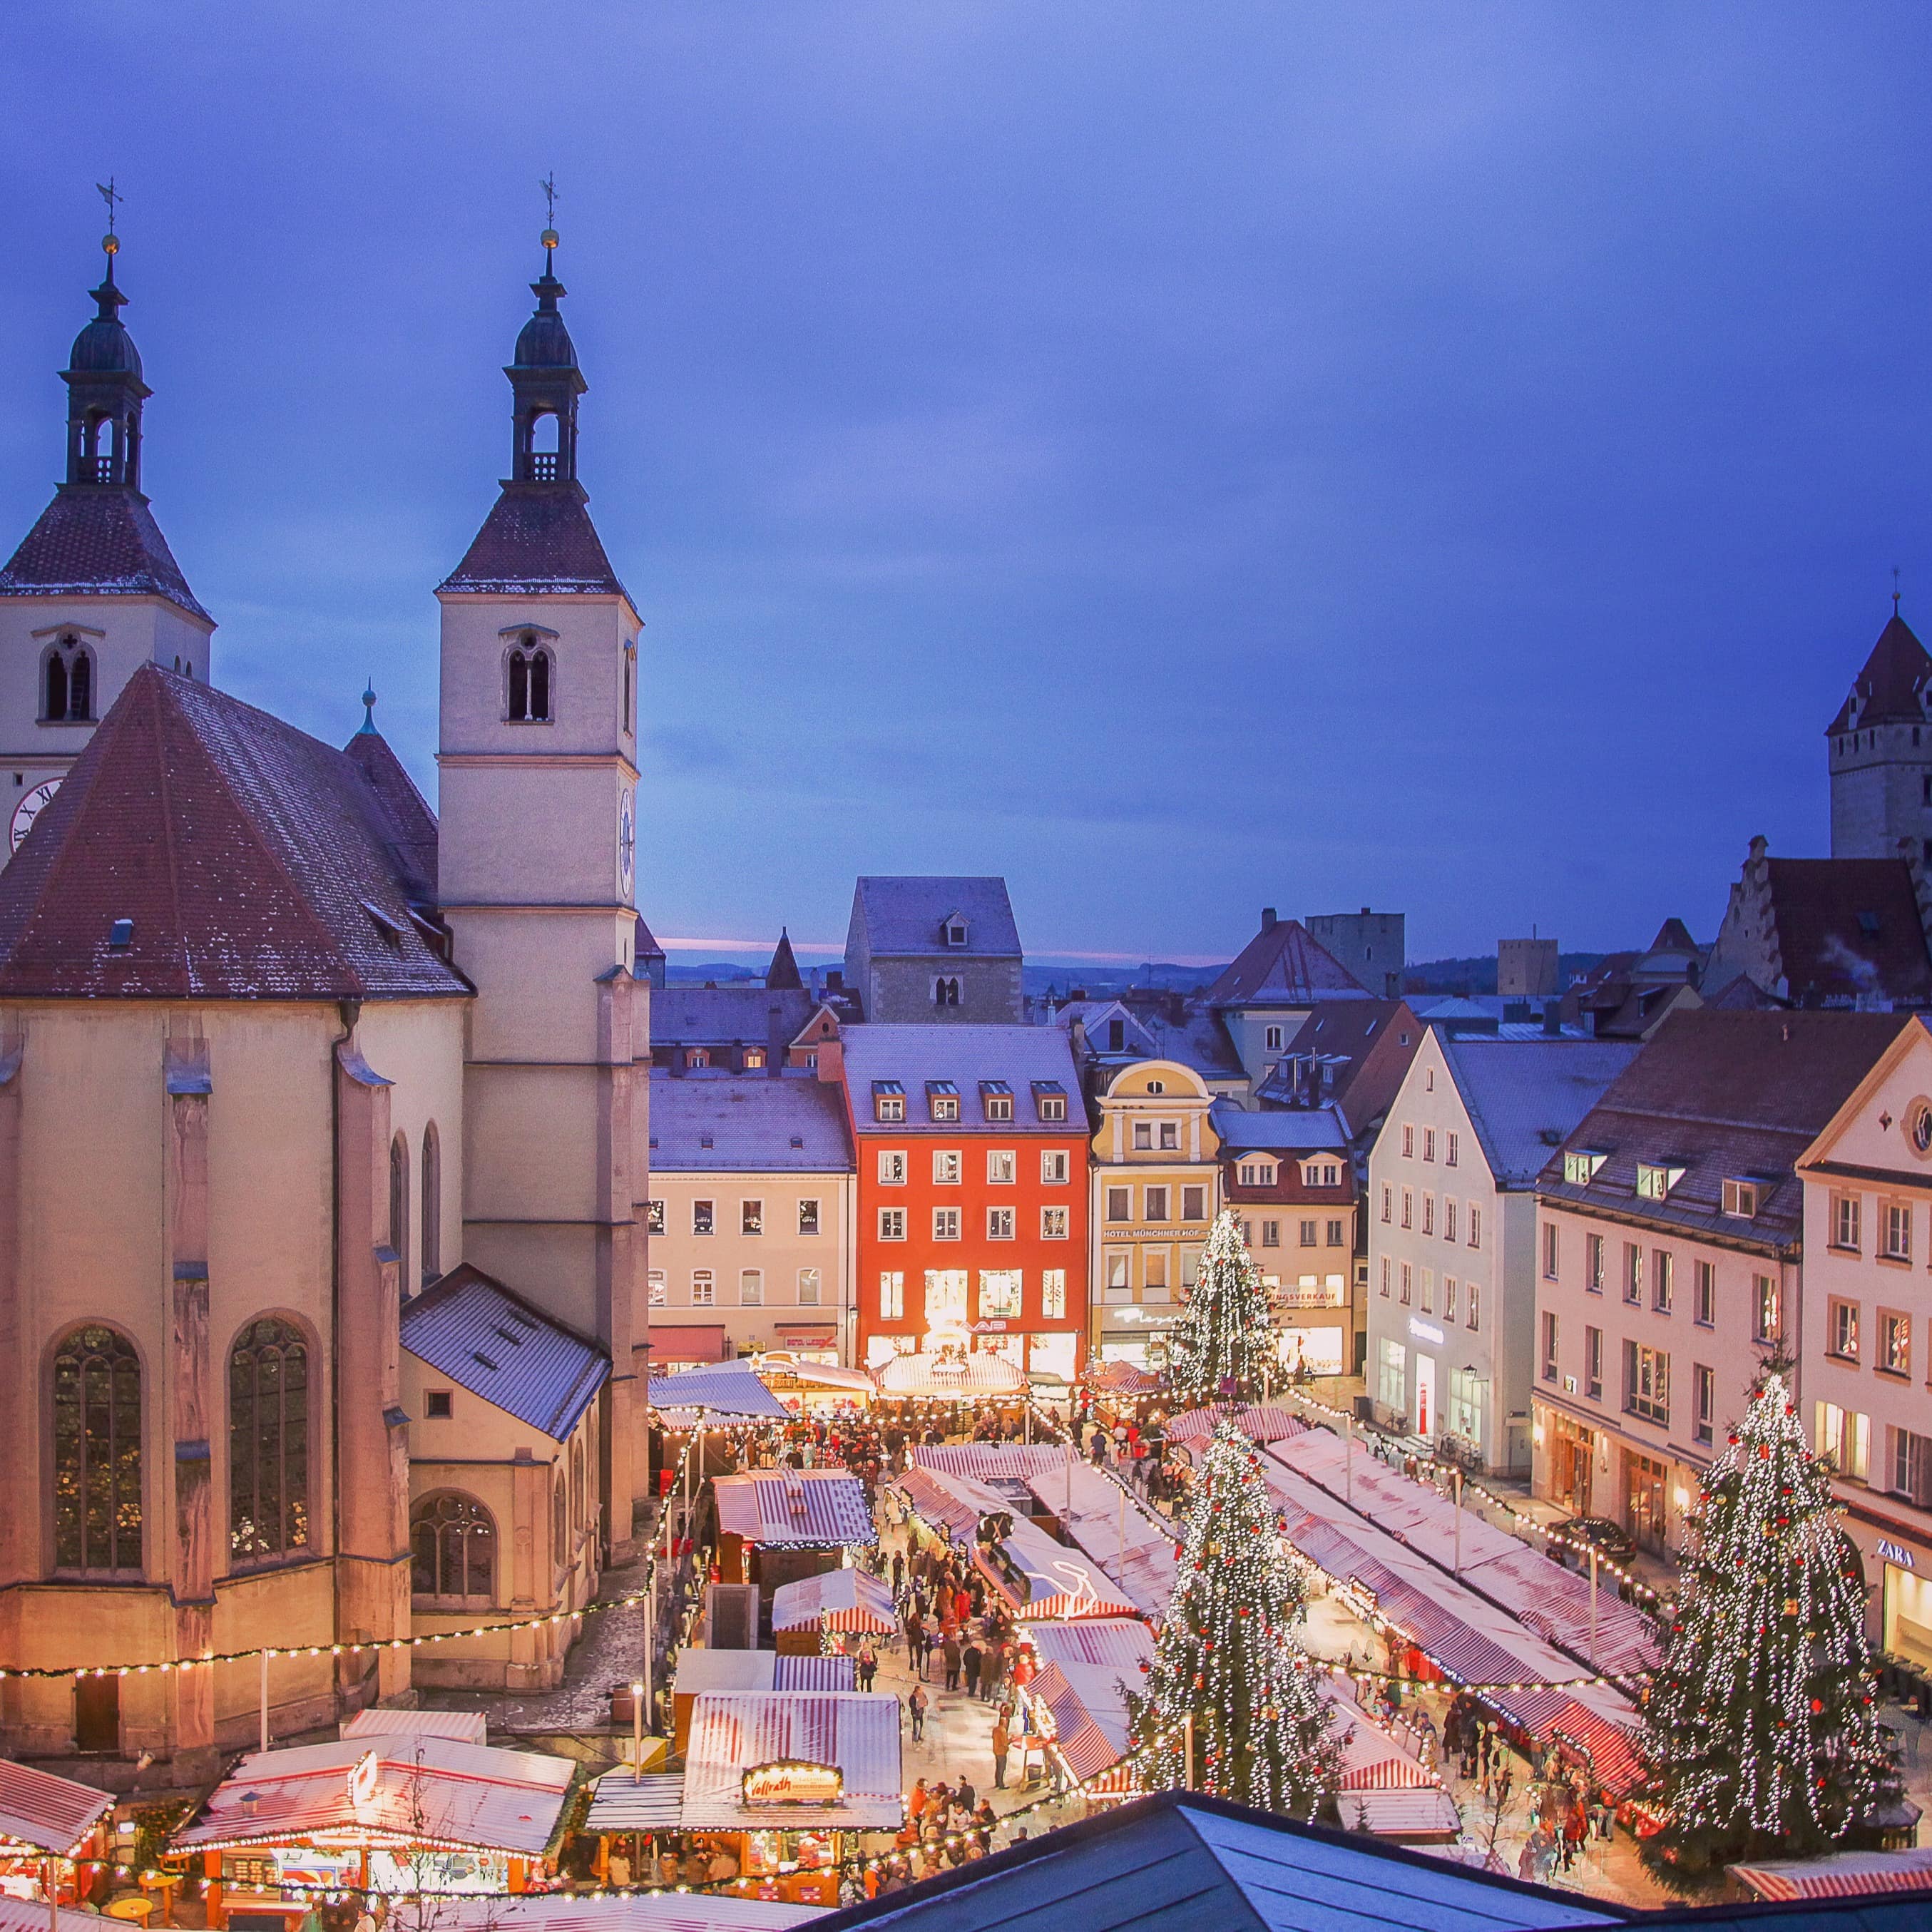 Old-world village in Germany decorated for Christmas